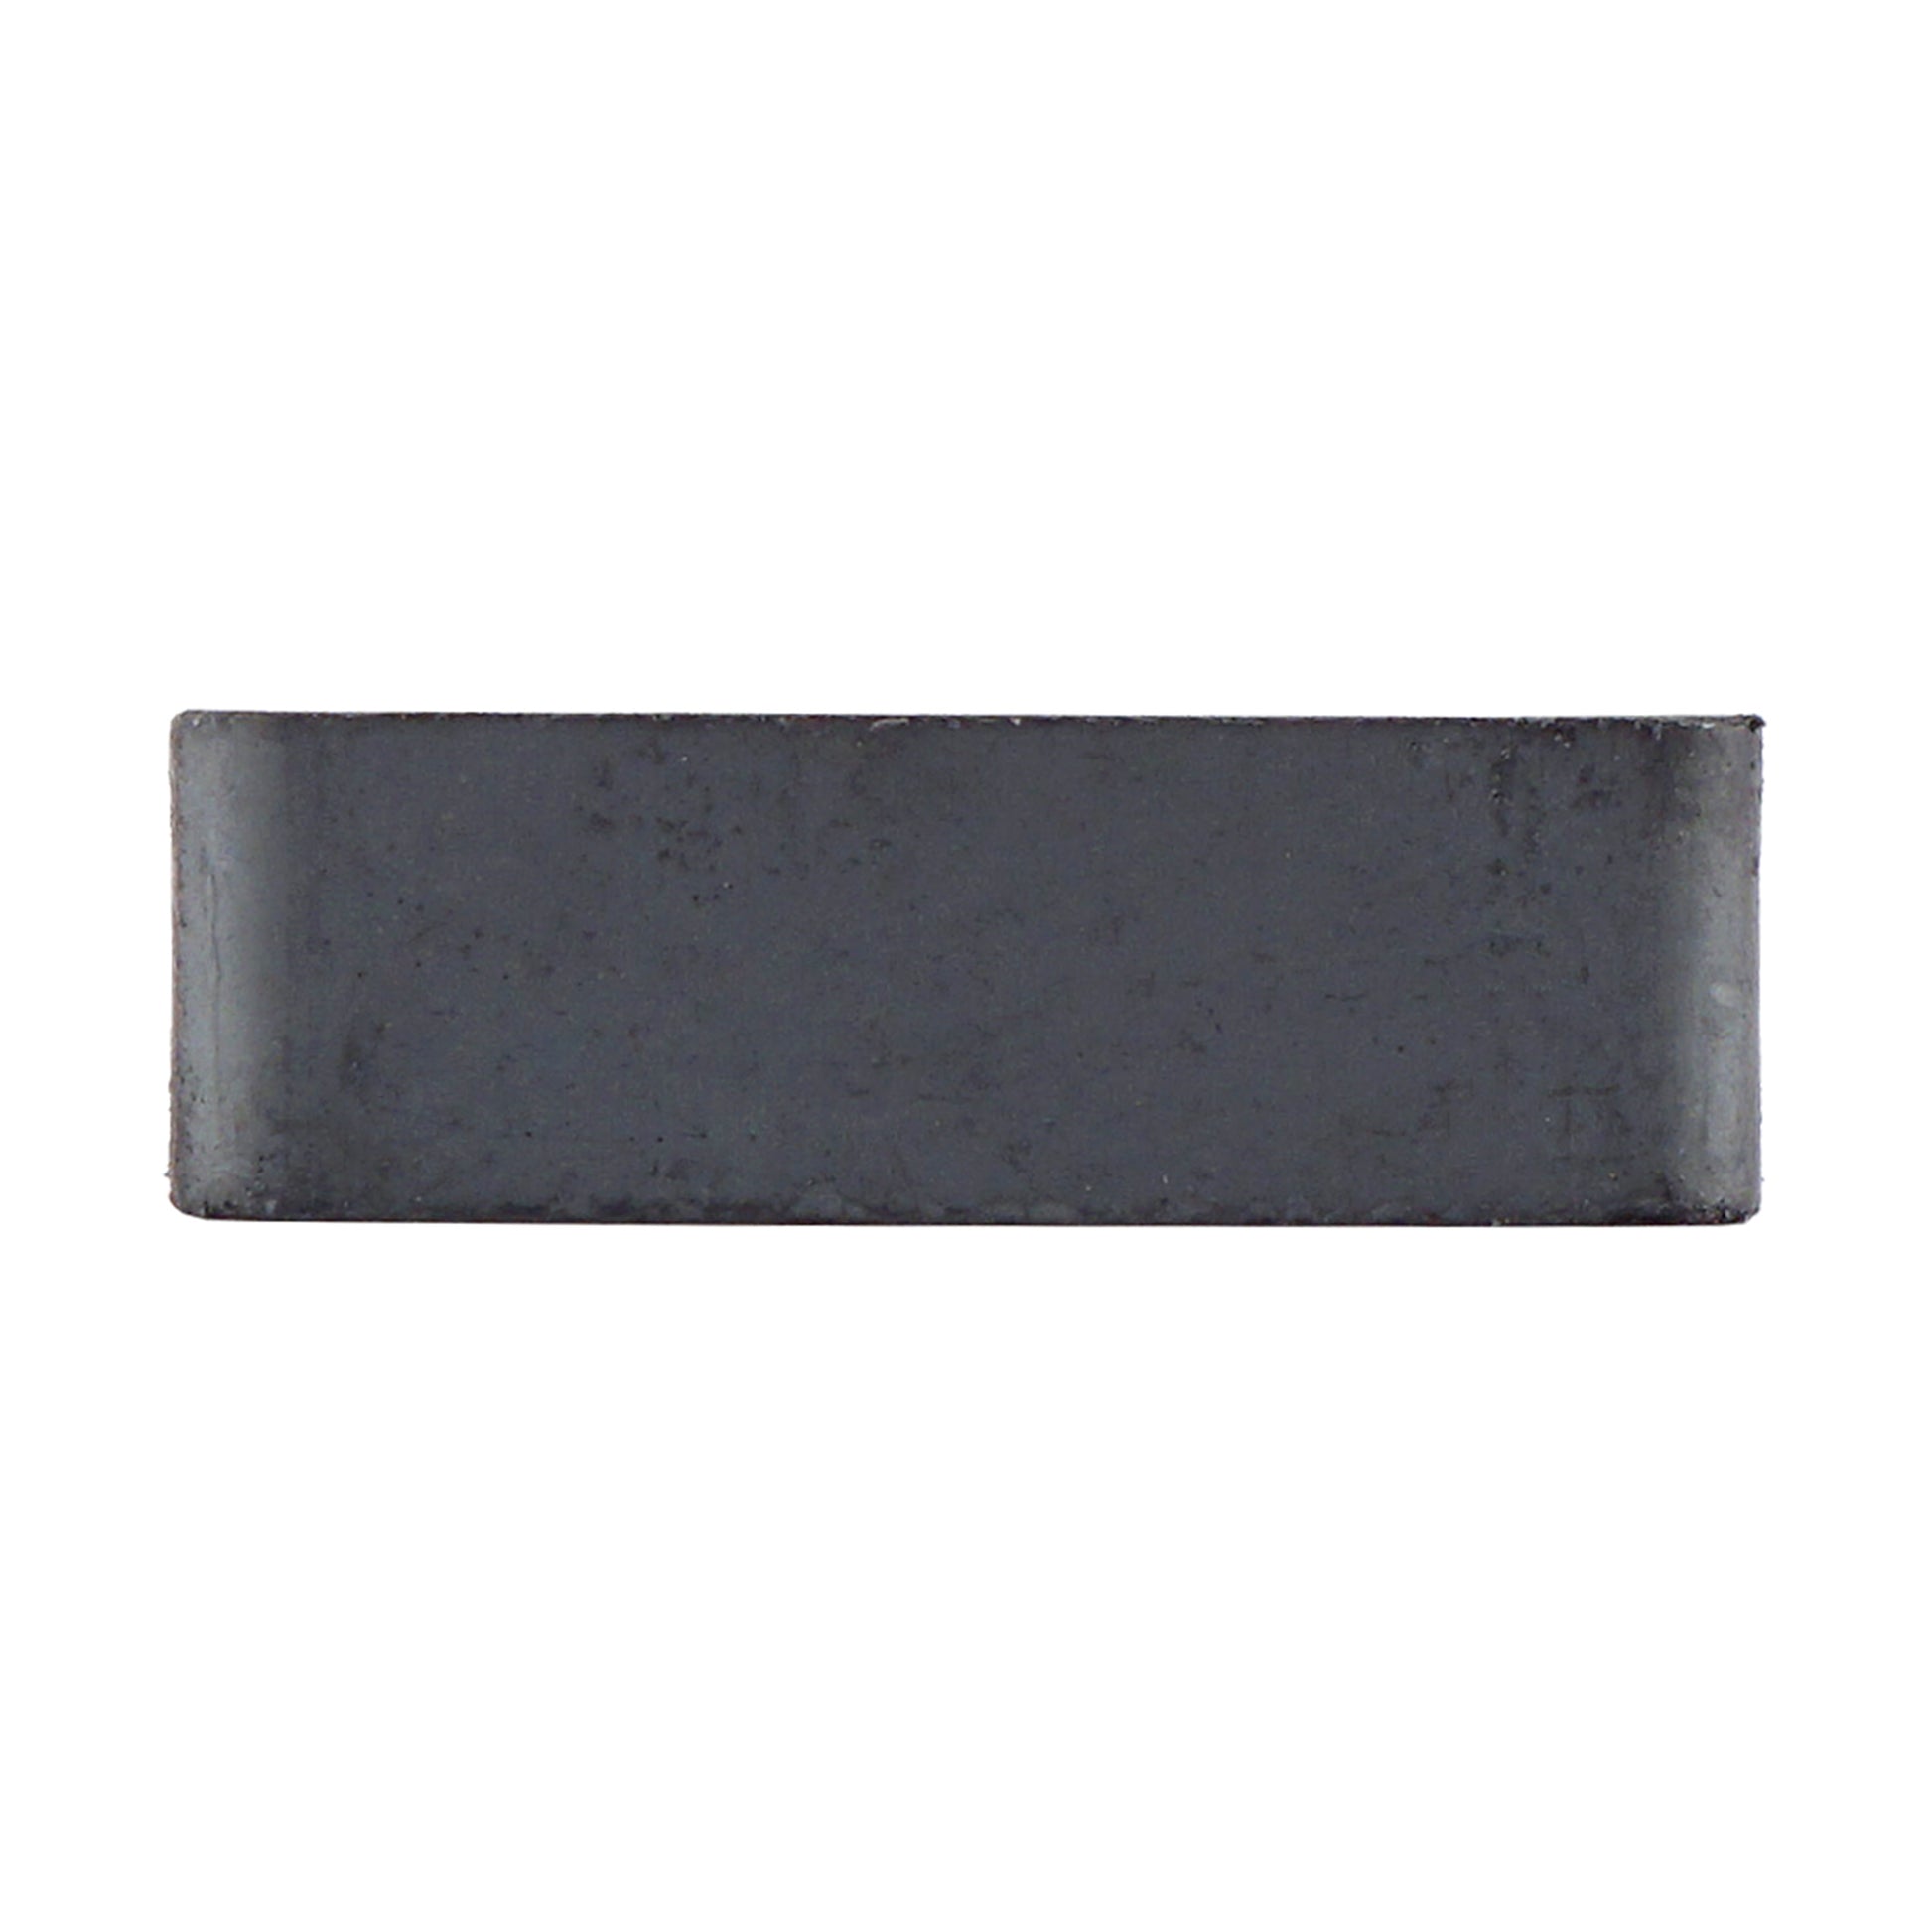 Load image into Gallery viewer, CB247MAG Ceramic Block Magnet - Front View